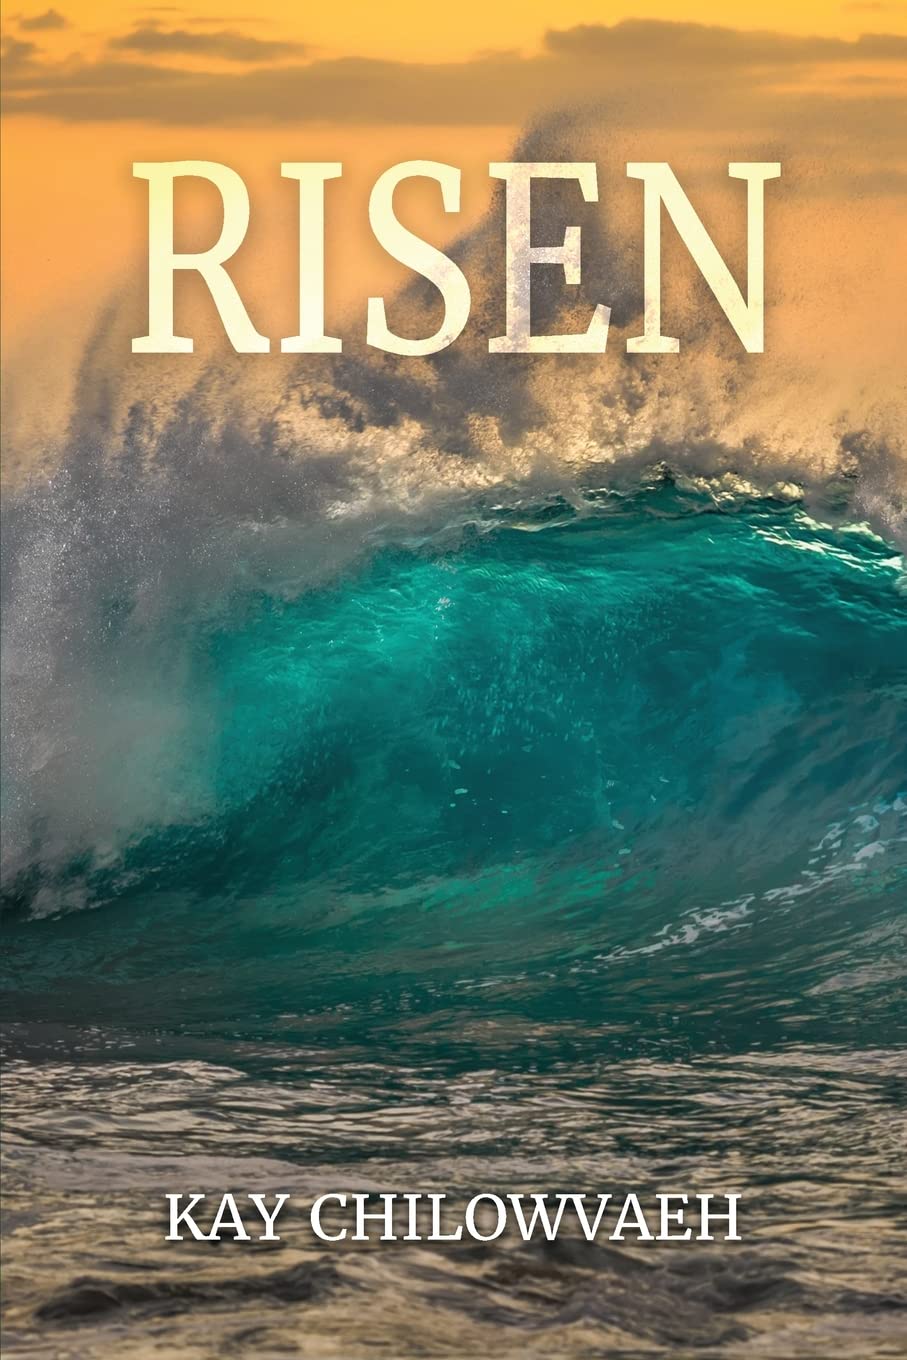 Author's Tranquility Press Releases New Book "Risen" - A Story of Hope and Redemption